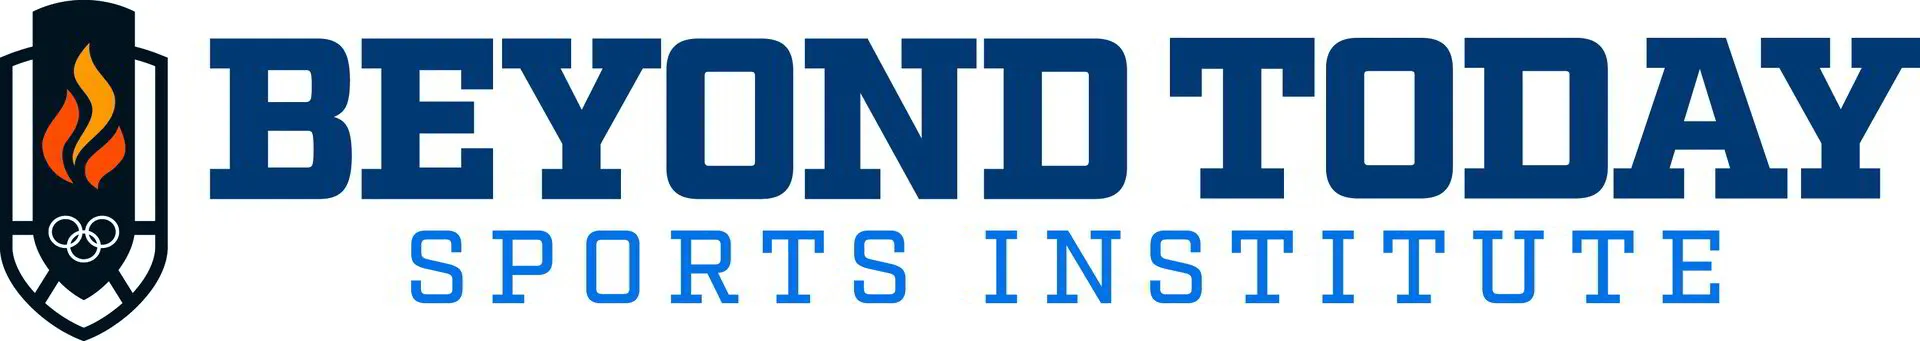 Beyond Today Sports Institute